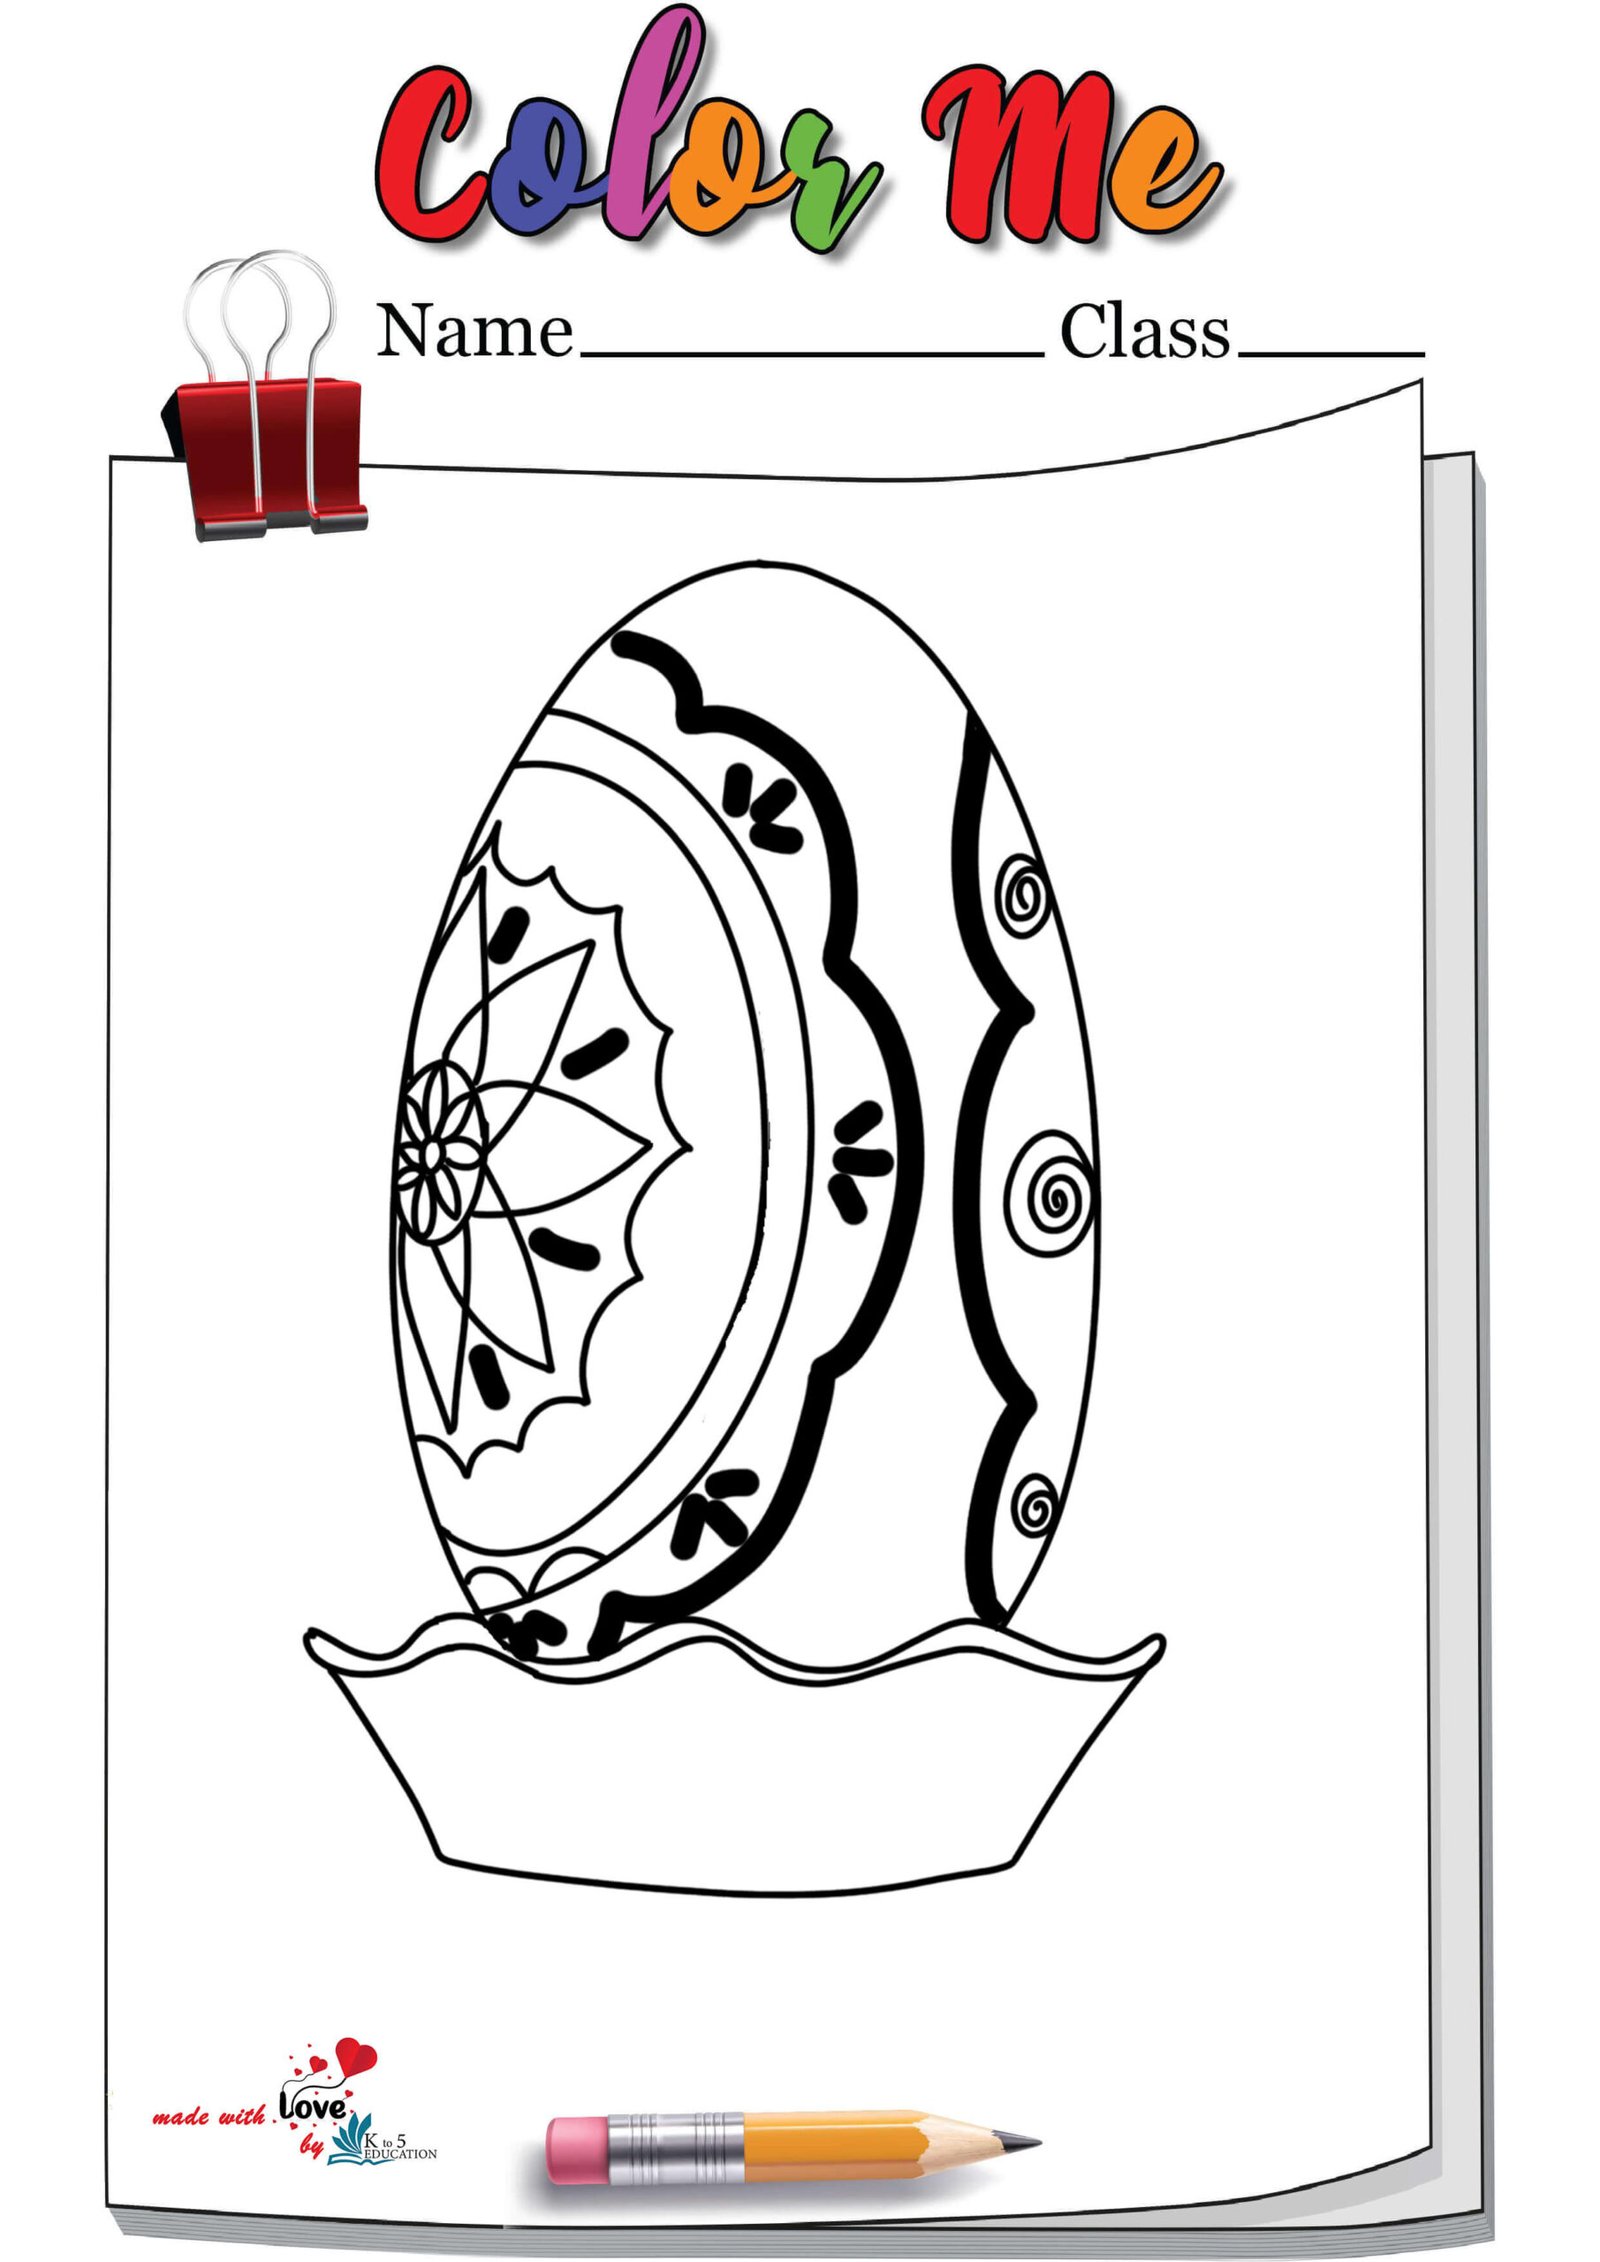 Giant Easter Eggs Printable Coloring Page